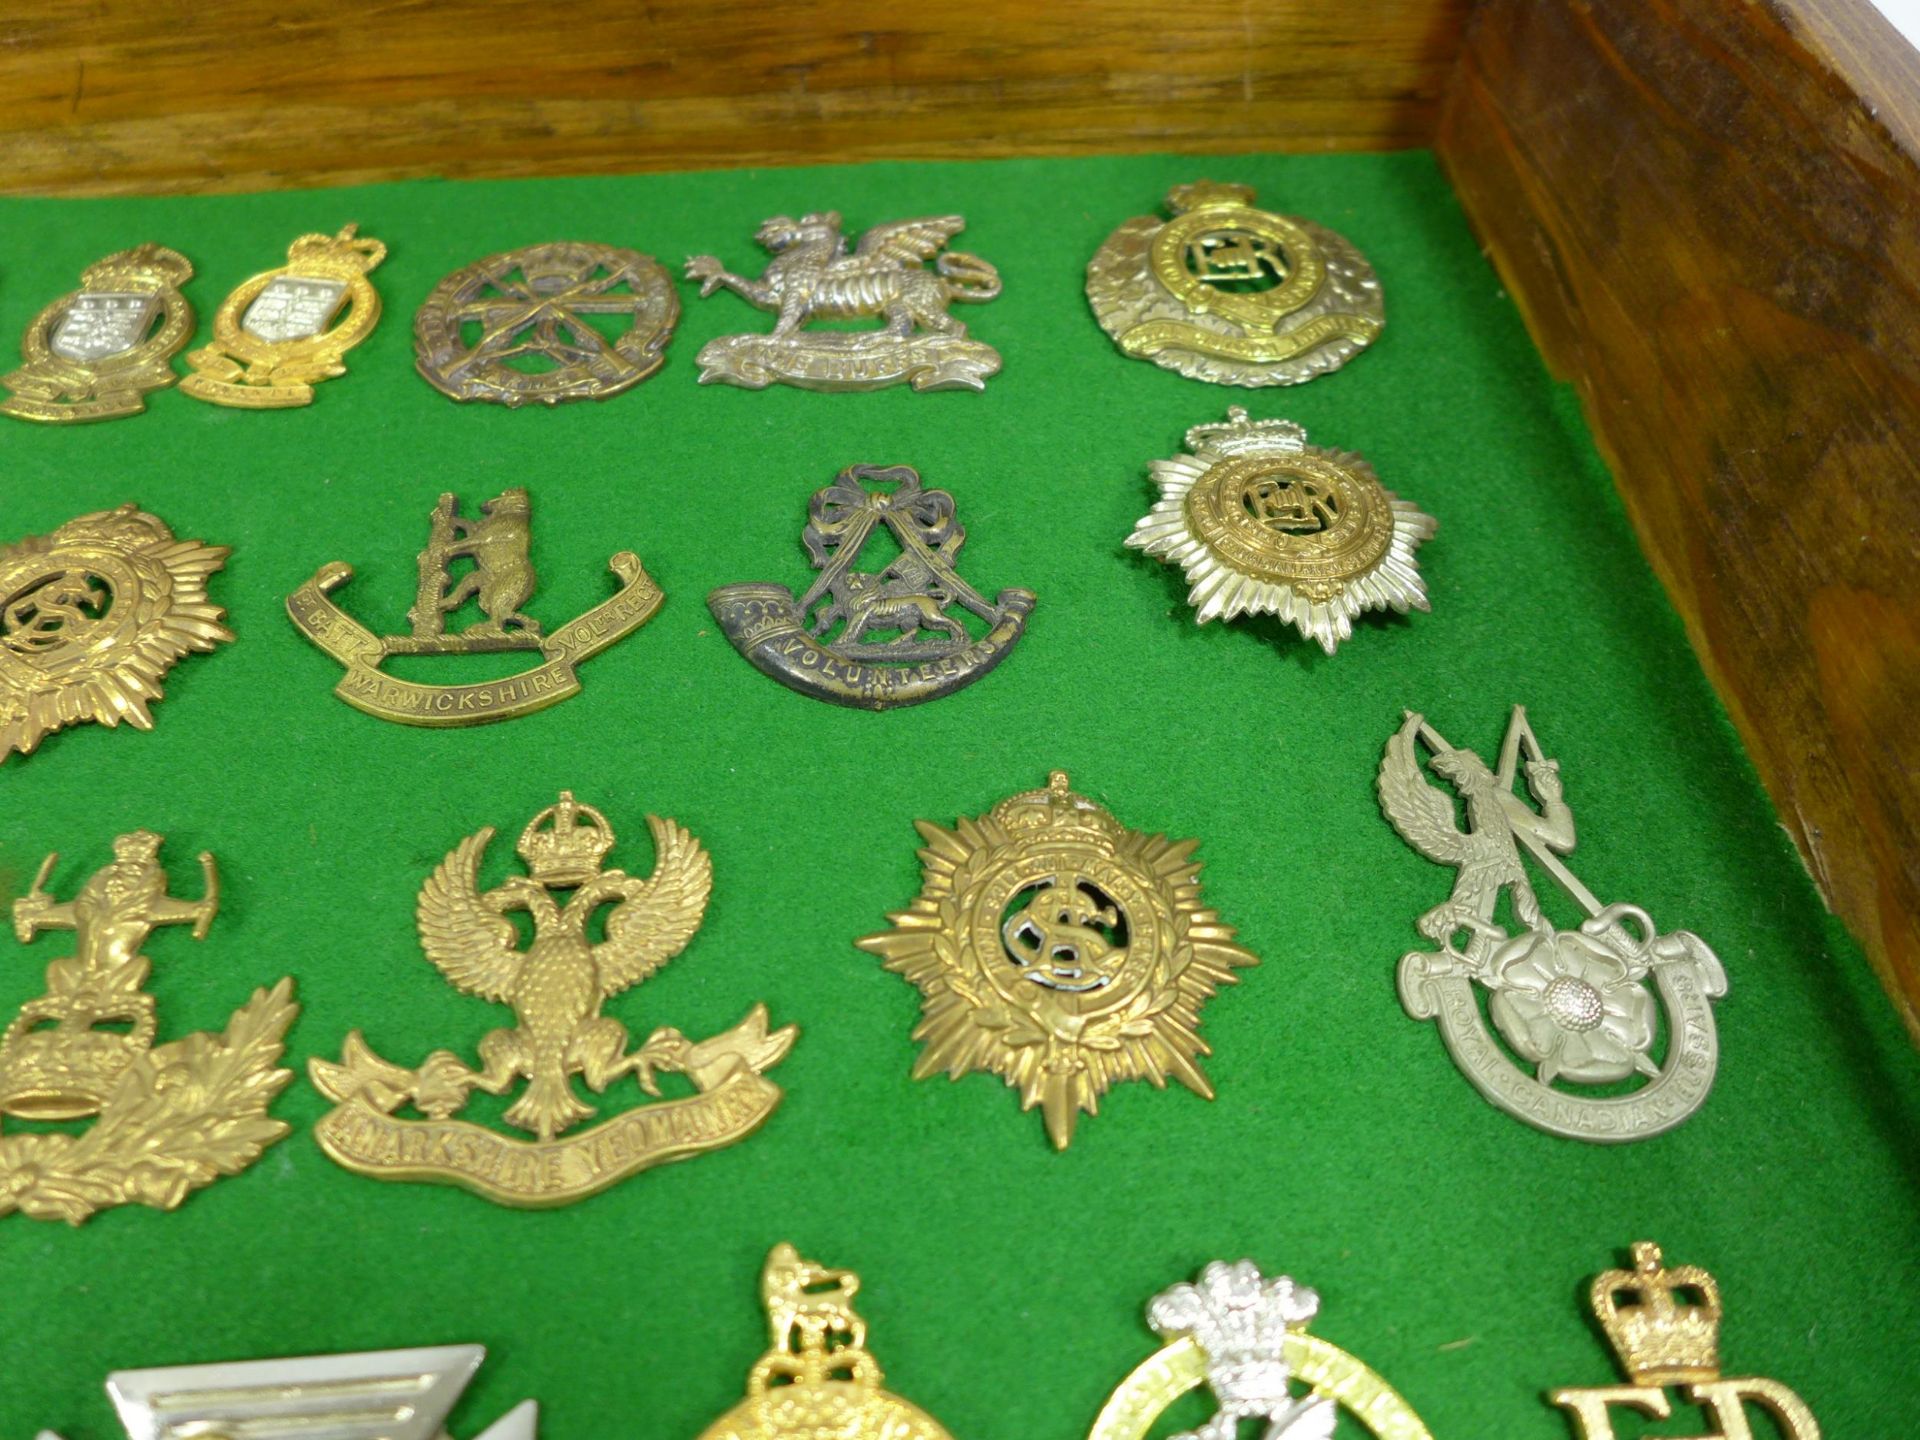 A GLAZED DISPLAY CASE CONTAINING FORTY FIVE BRITISH MILITARY BADGES, 34CM X 39CM - Image 3 of 6